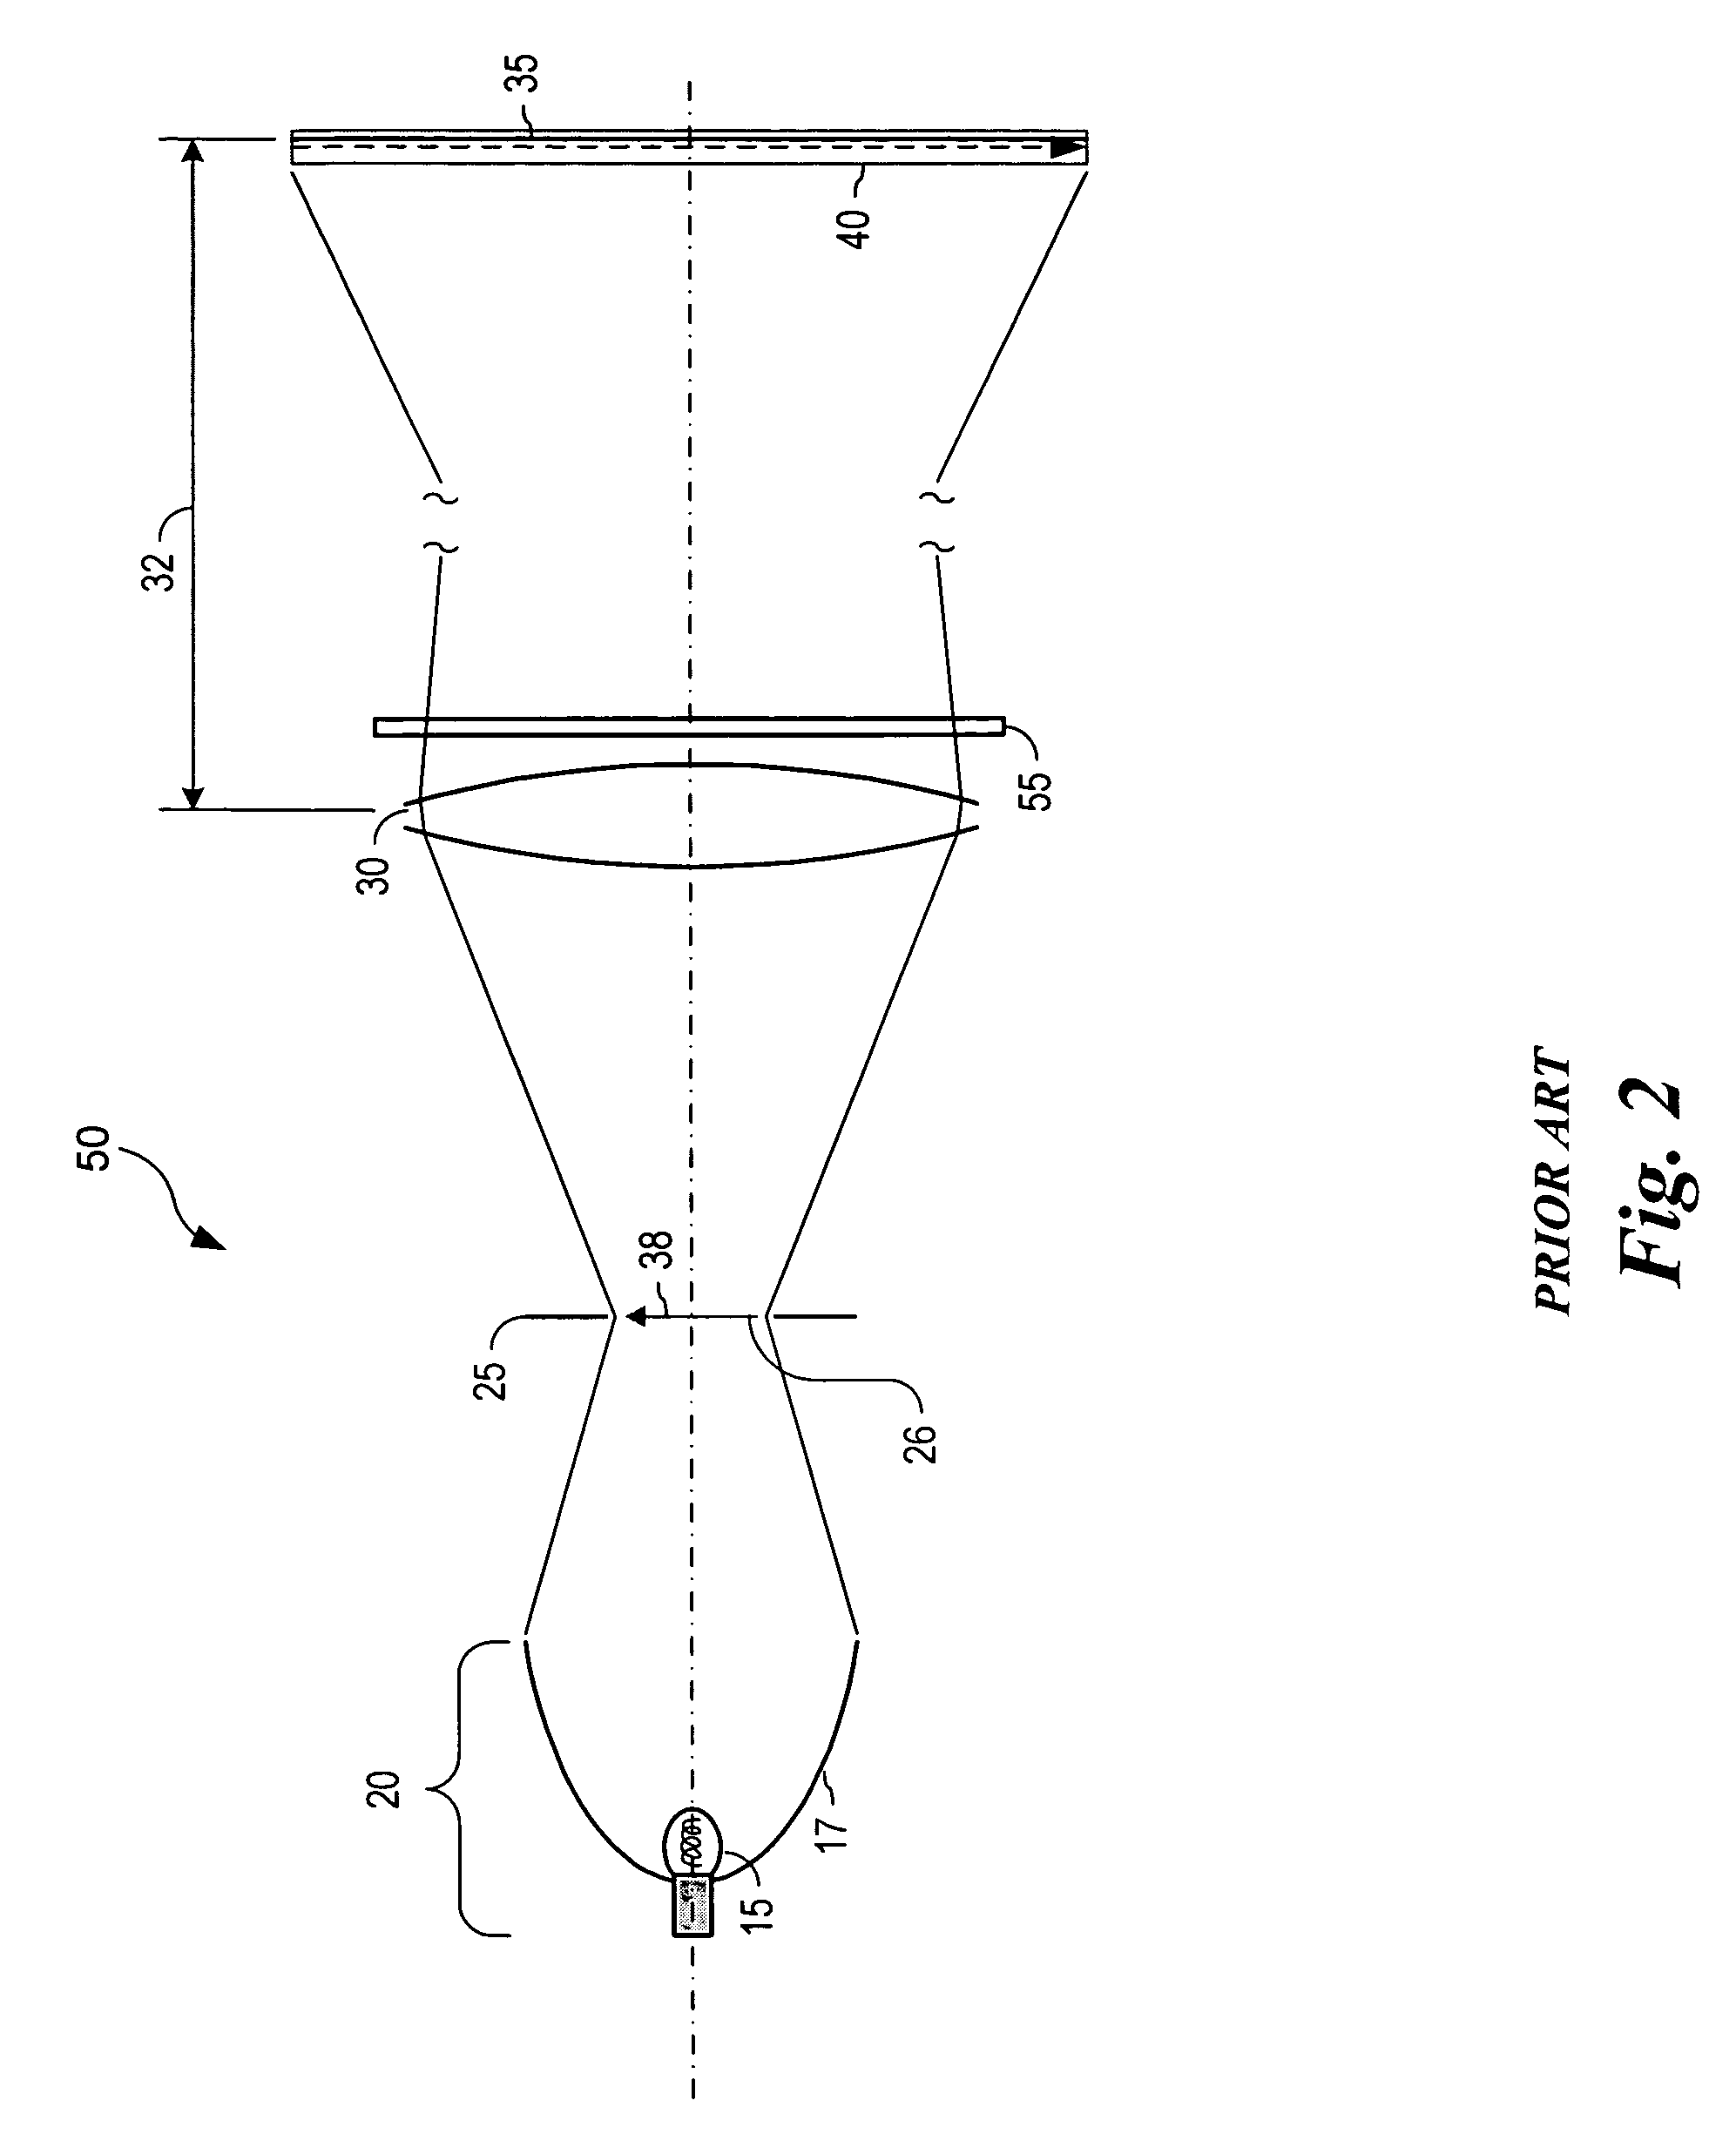 Stage lighting methods and apparatus